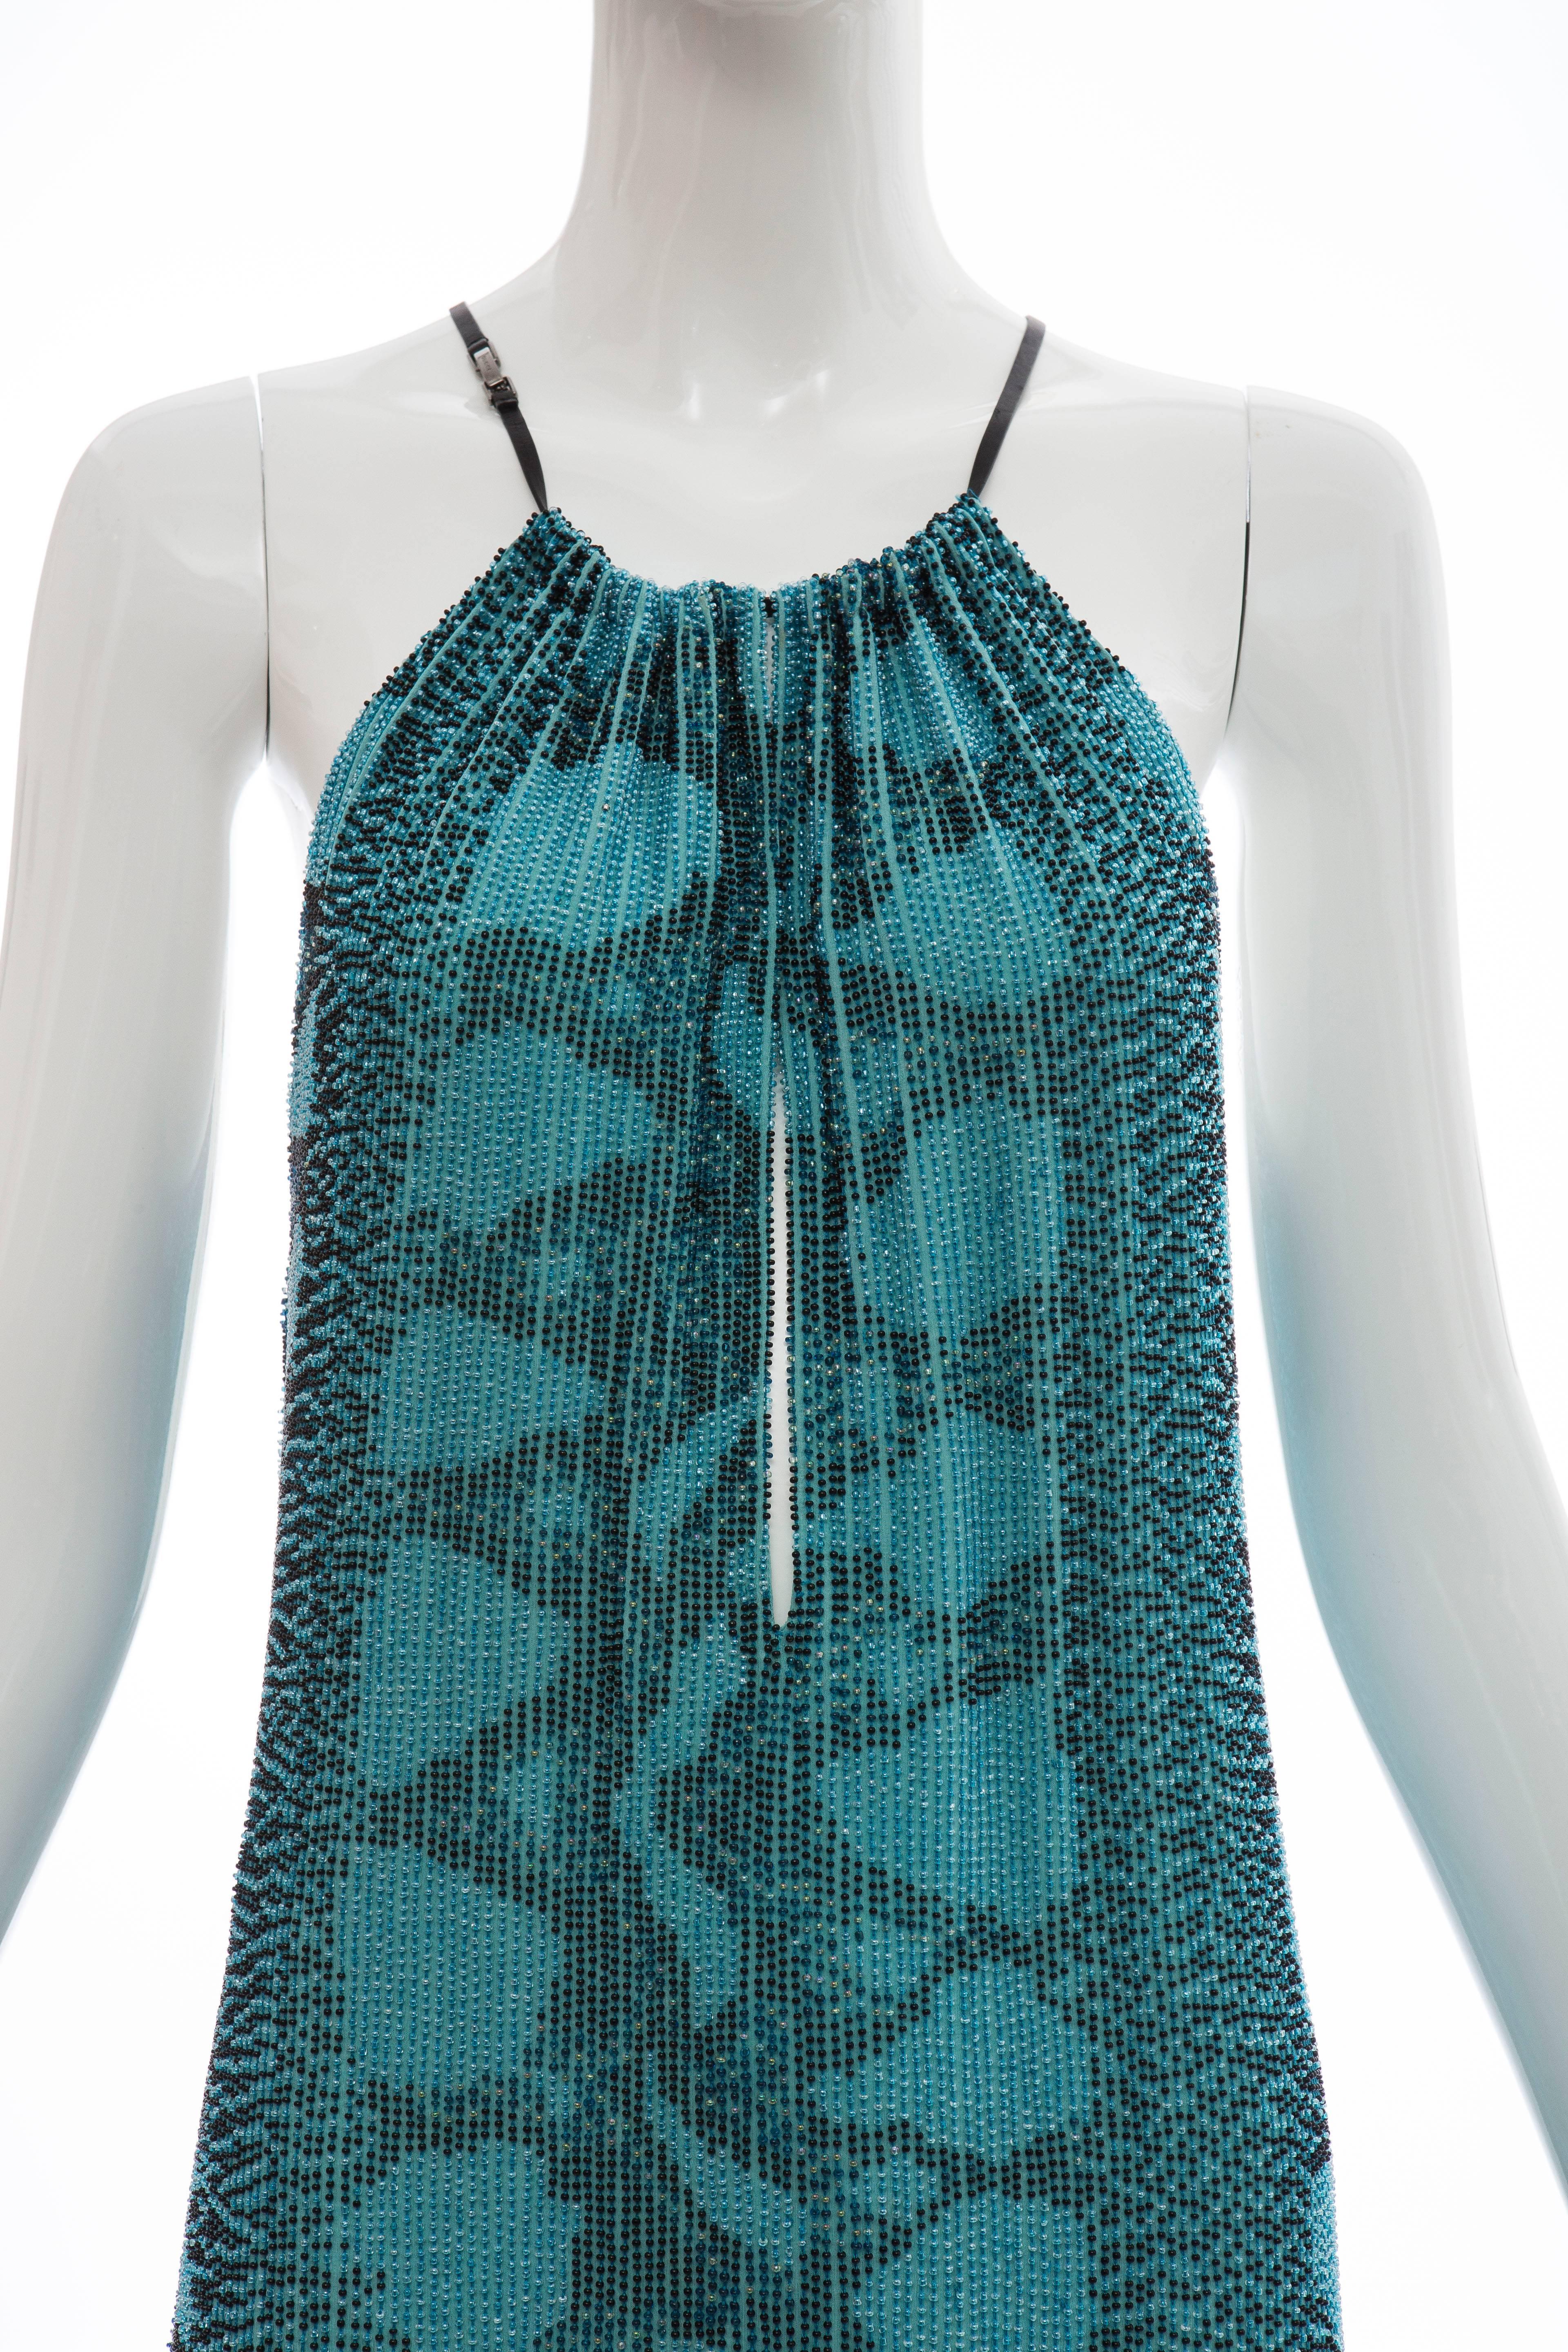 Tom Ford for Gucci Runway Silk Beaded Python Print Shift Dress, Spring 2000 For Sale 1